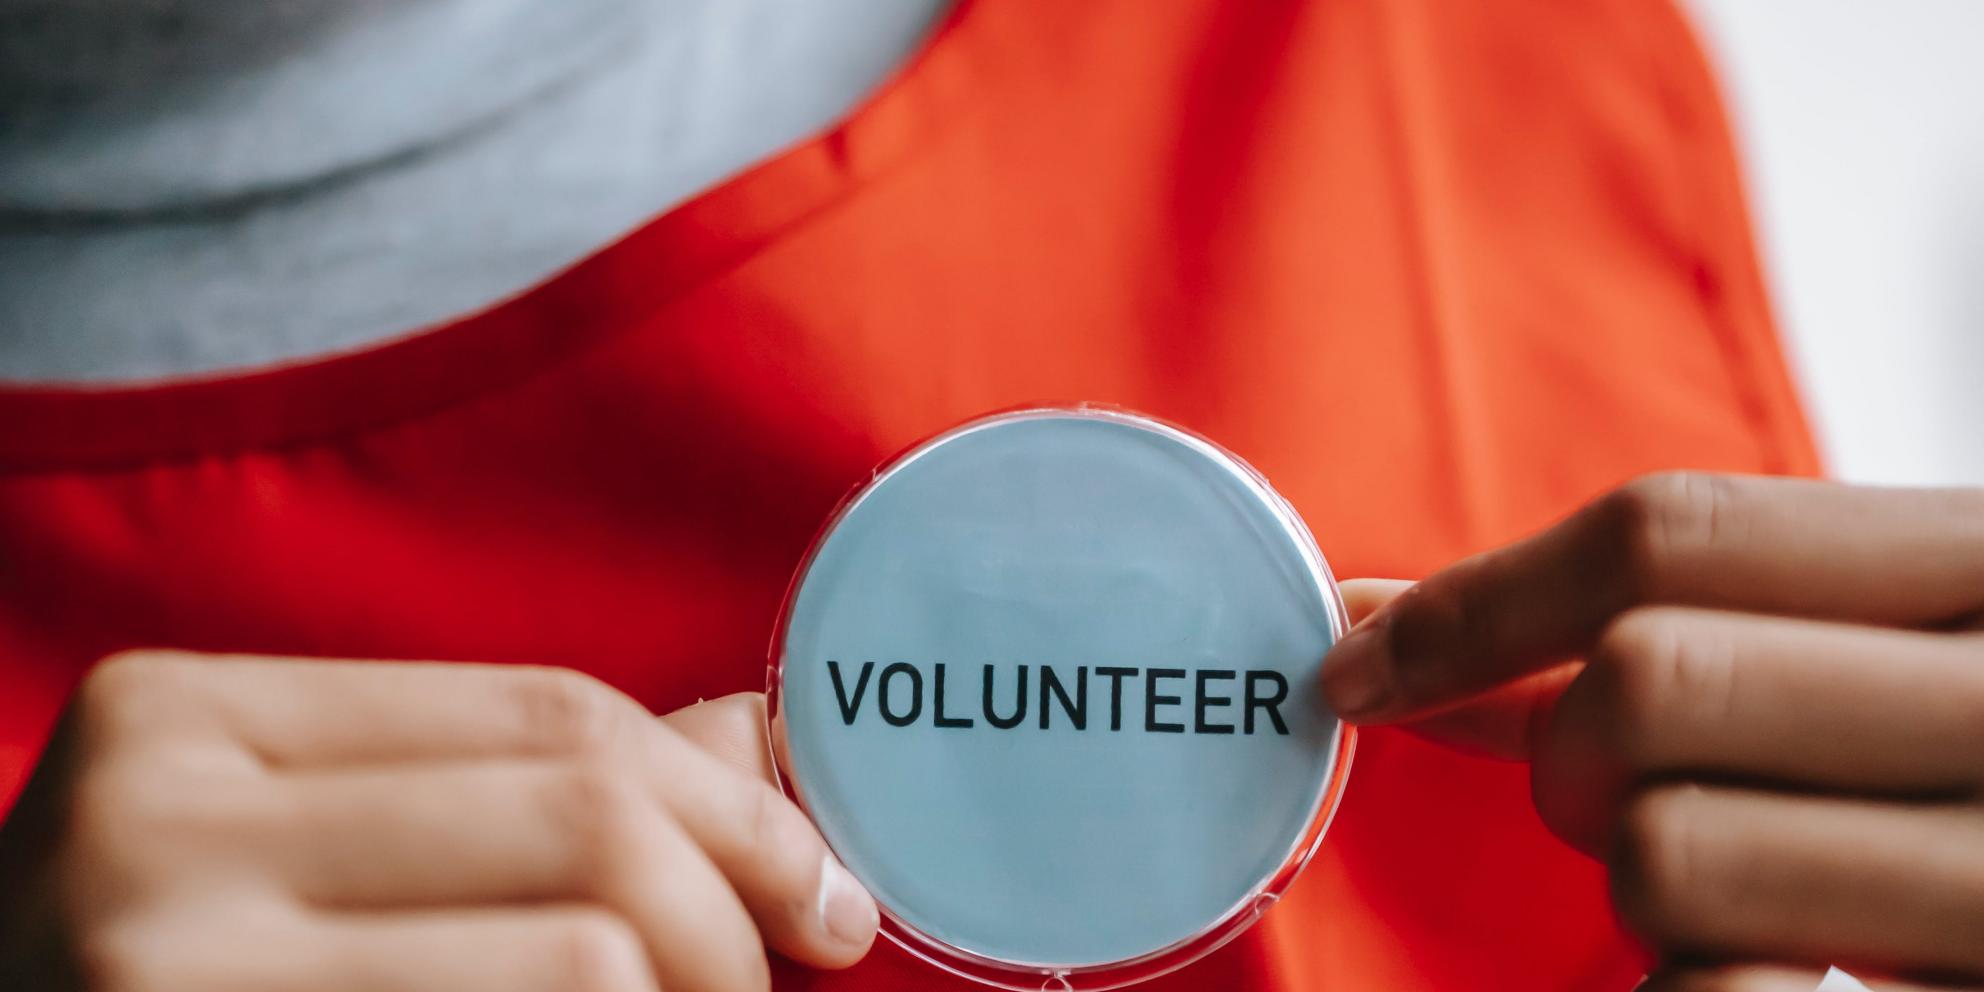 Person in warm orange t-shirt holding a volunteer badge